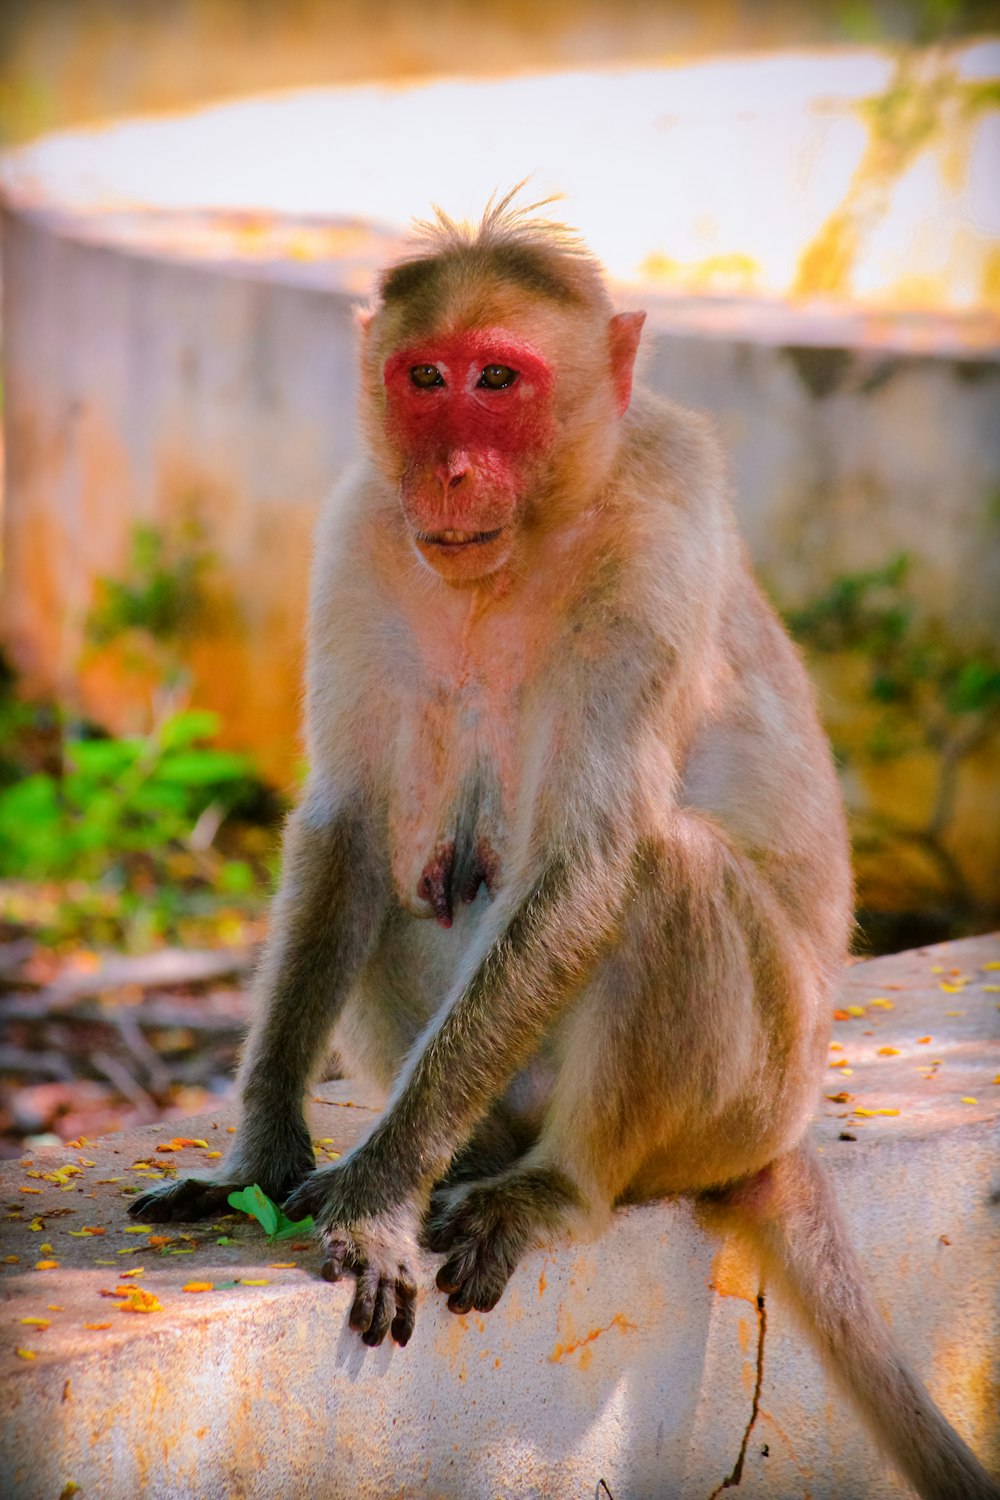 a monkey with a red face sitting on a rock